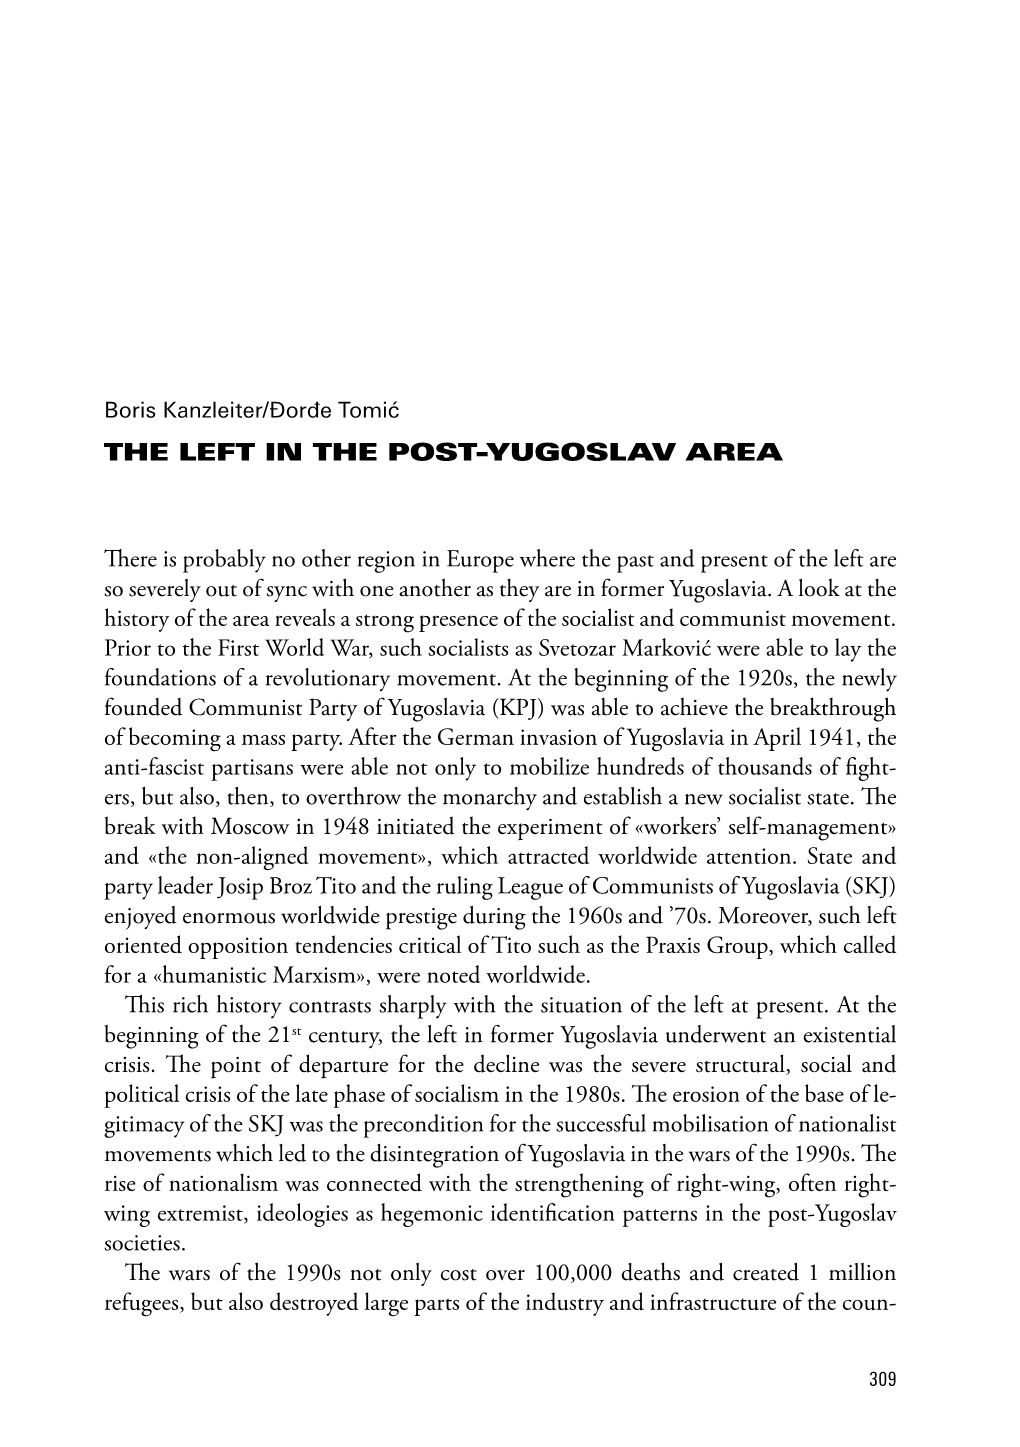 The Left in the Post-Yugoslav Area There Is Probably No Other Region in Europe Where the Past and Present of the Left Are So